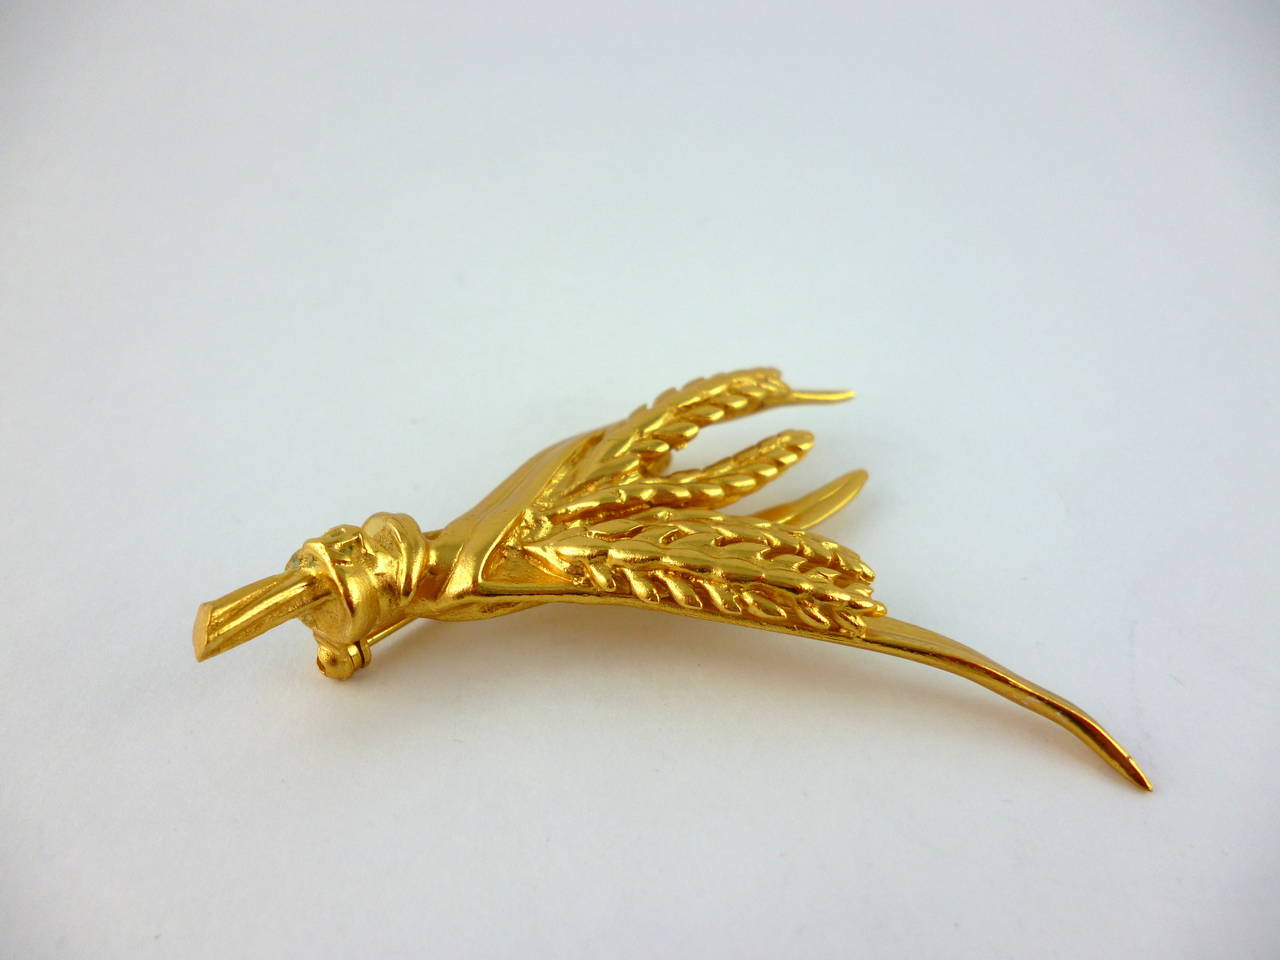 CHANEL vintage 1993 Spring wheat sheath brooch with CC monogram.

Wheat is a recurrent symbol in the Gabrielle Chanel privacy. In each room of its apartment in Paris wheat comes in brass bouquets, gilt wood on the fireplace in the lounge or in a